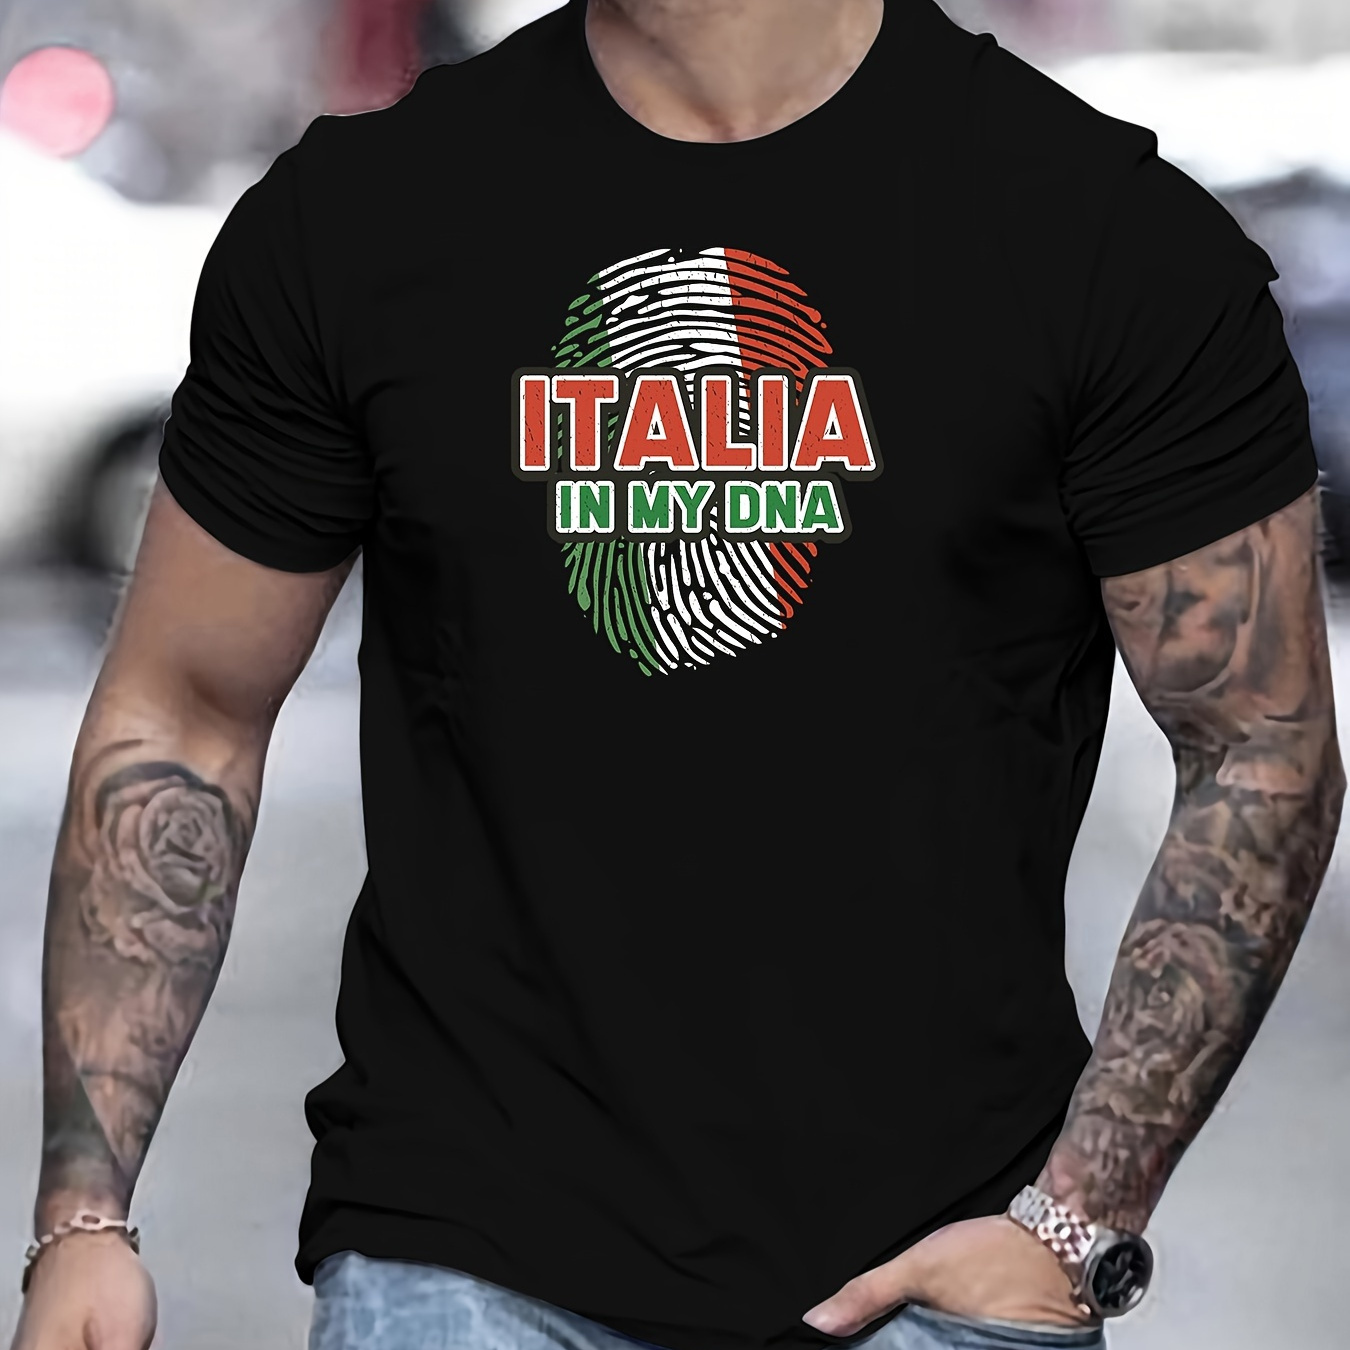 

Italia In My Dna Print Crew Neck T-shirt For Men, Casual Short Sleeve Top, Men's Clothing